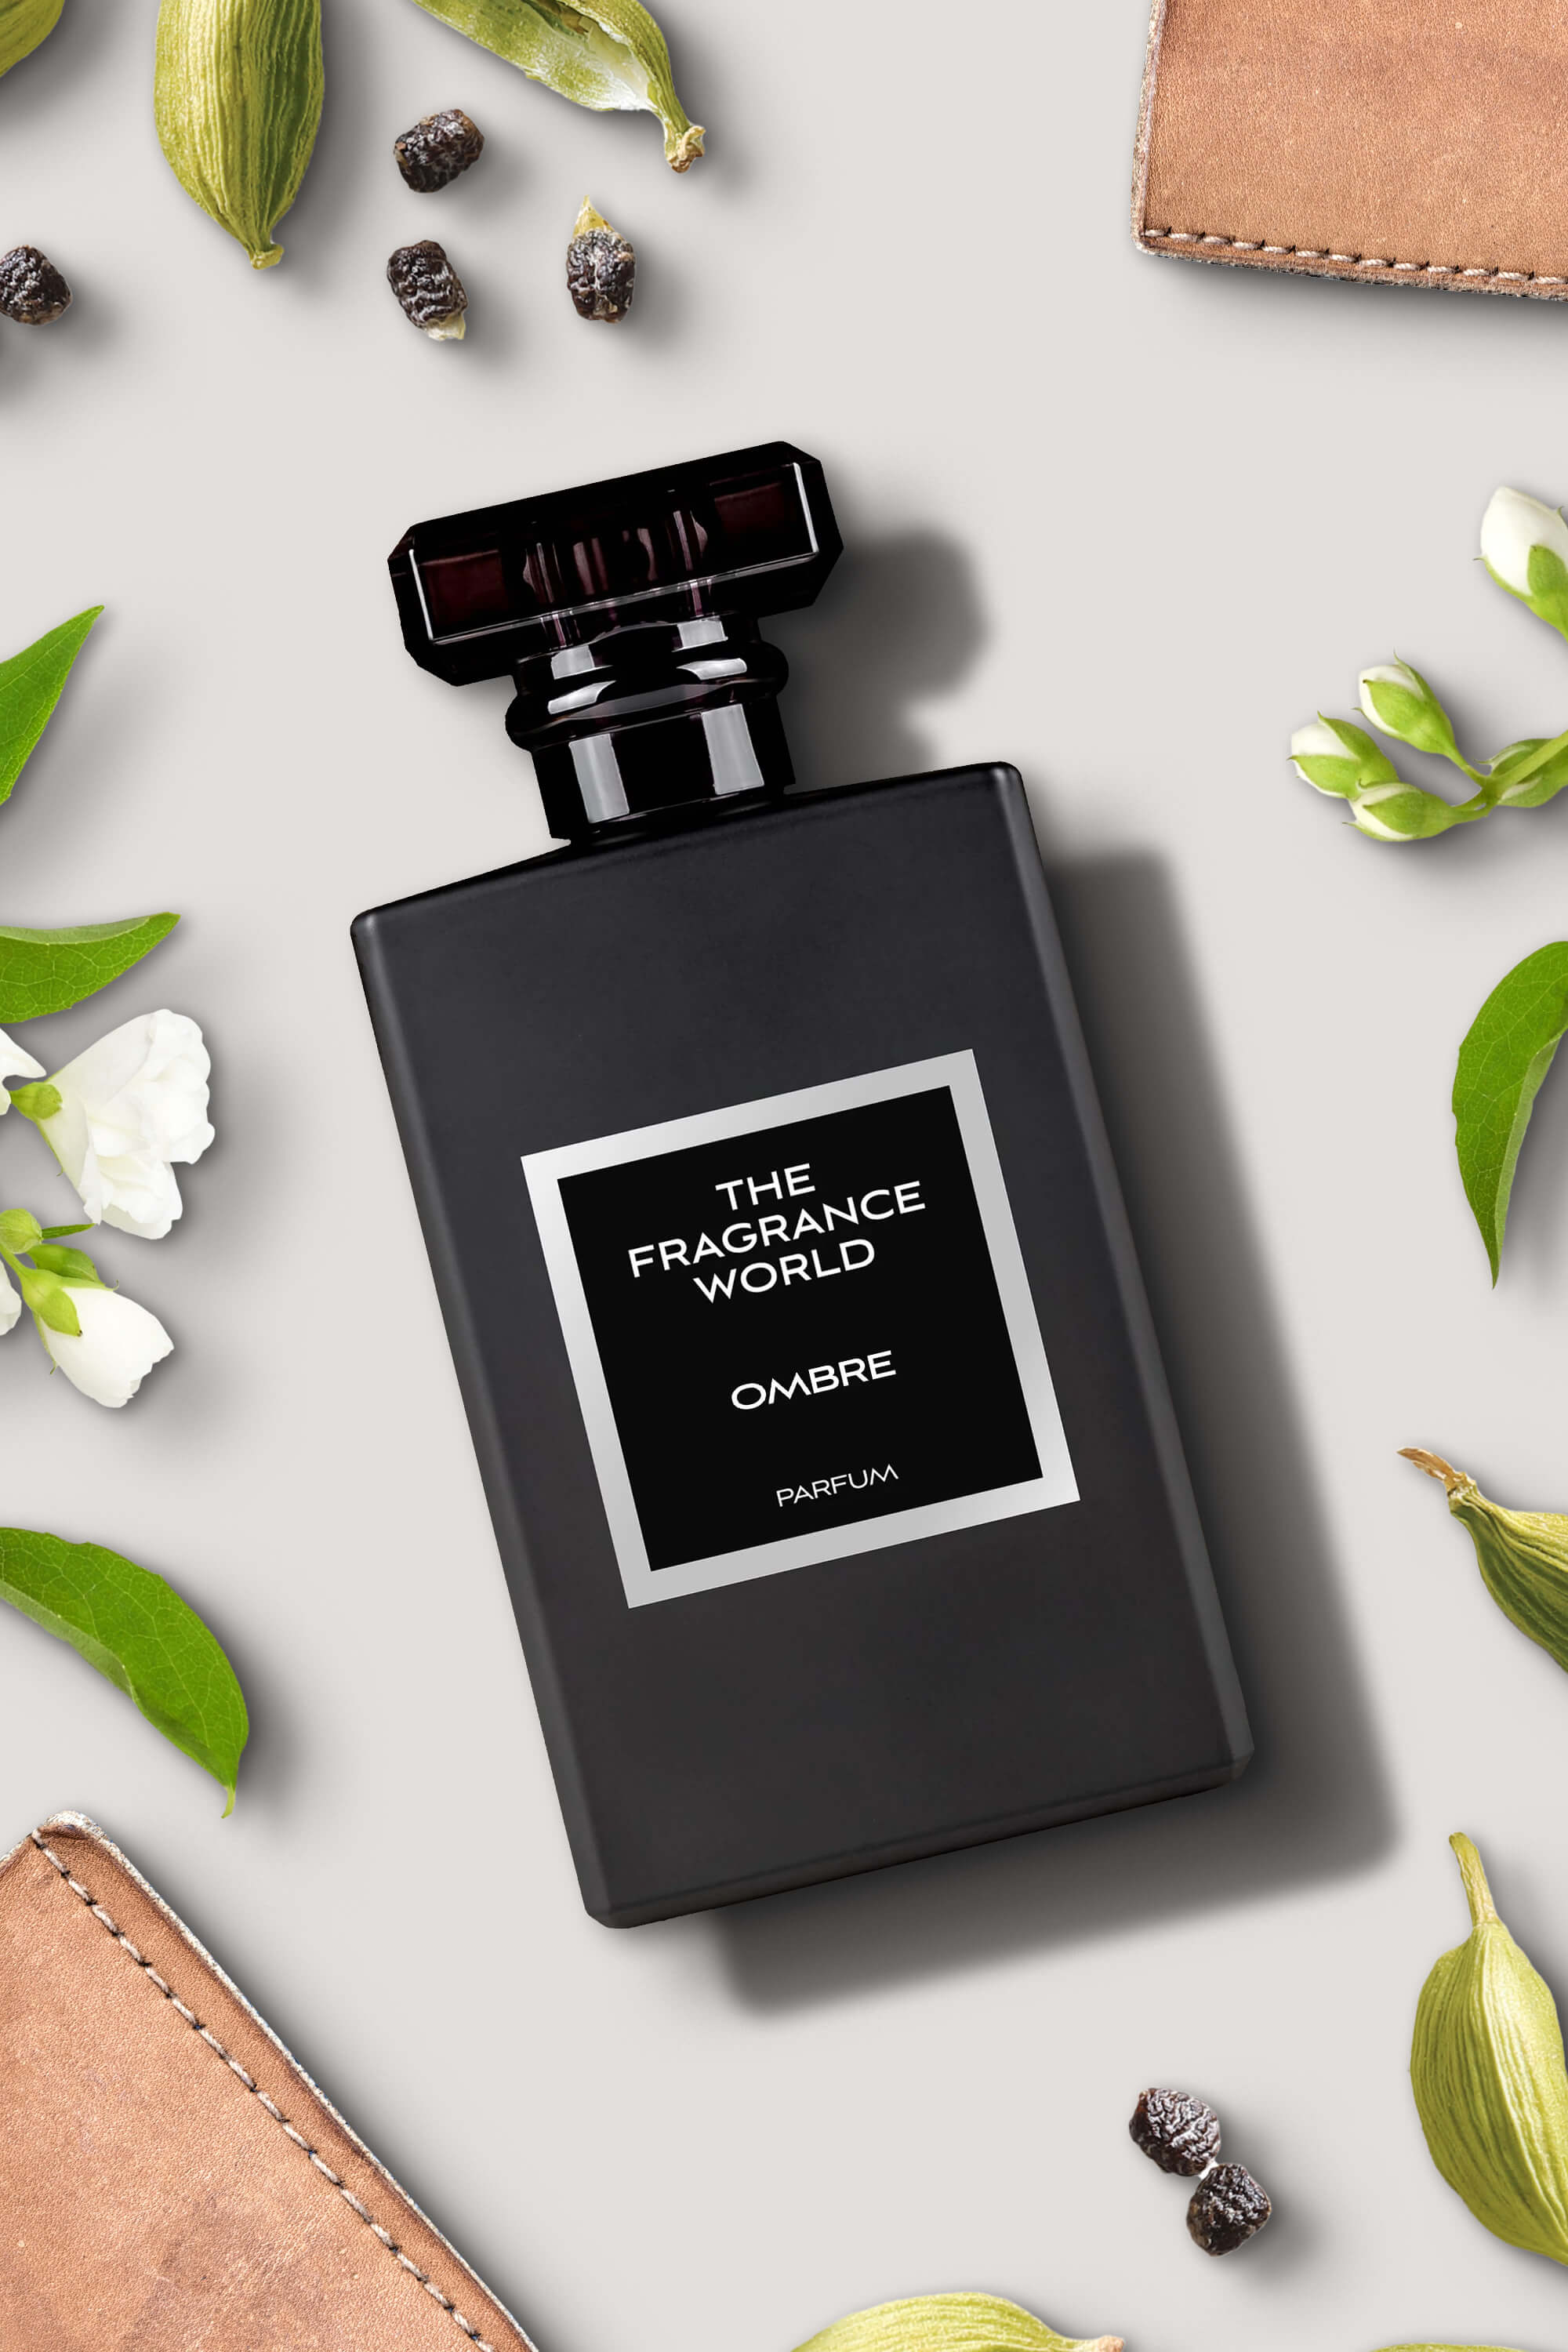 Inspired by Tom Ford's Ombre Leather Perfume - The Fragrance World